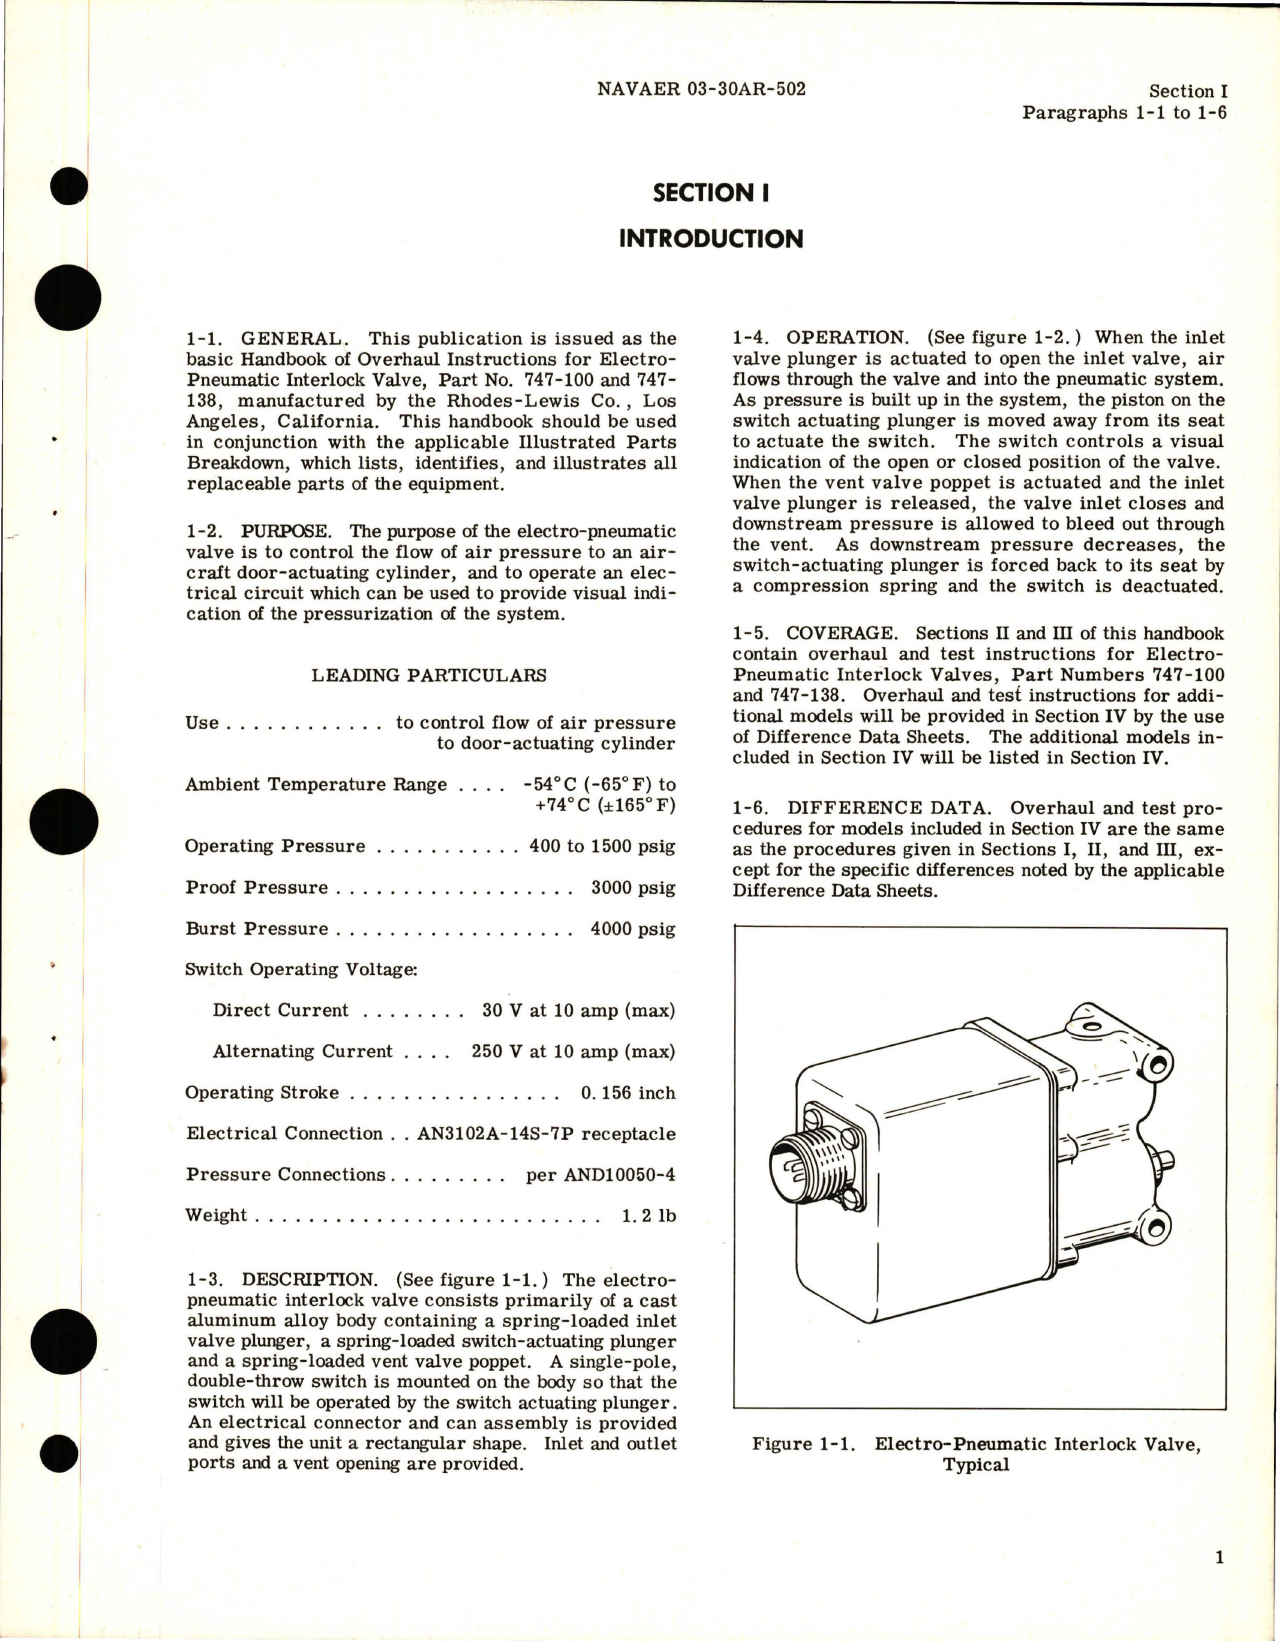 Sample page 5 from AirCorps Library document: Overhaul Instructions for Electro-Pneumatic Interlock Valves - Parts 747-100 and 747-138 